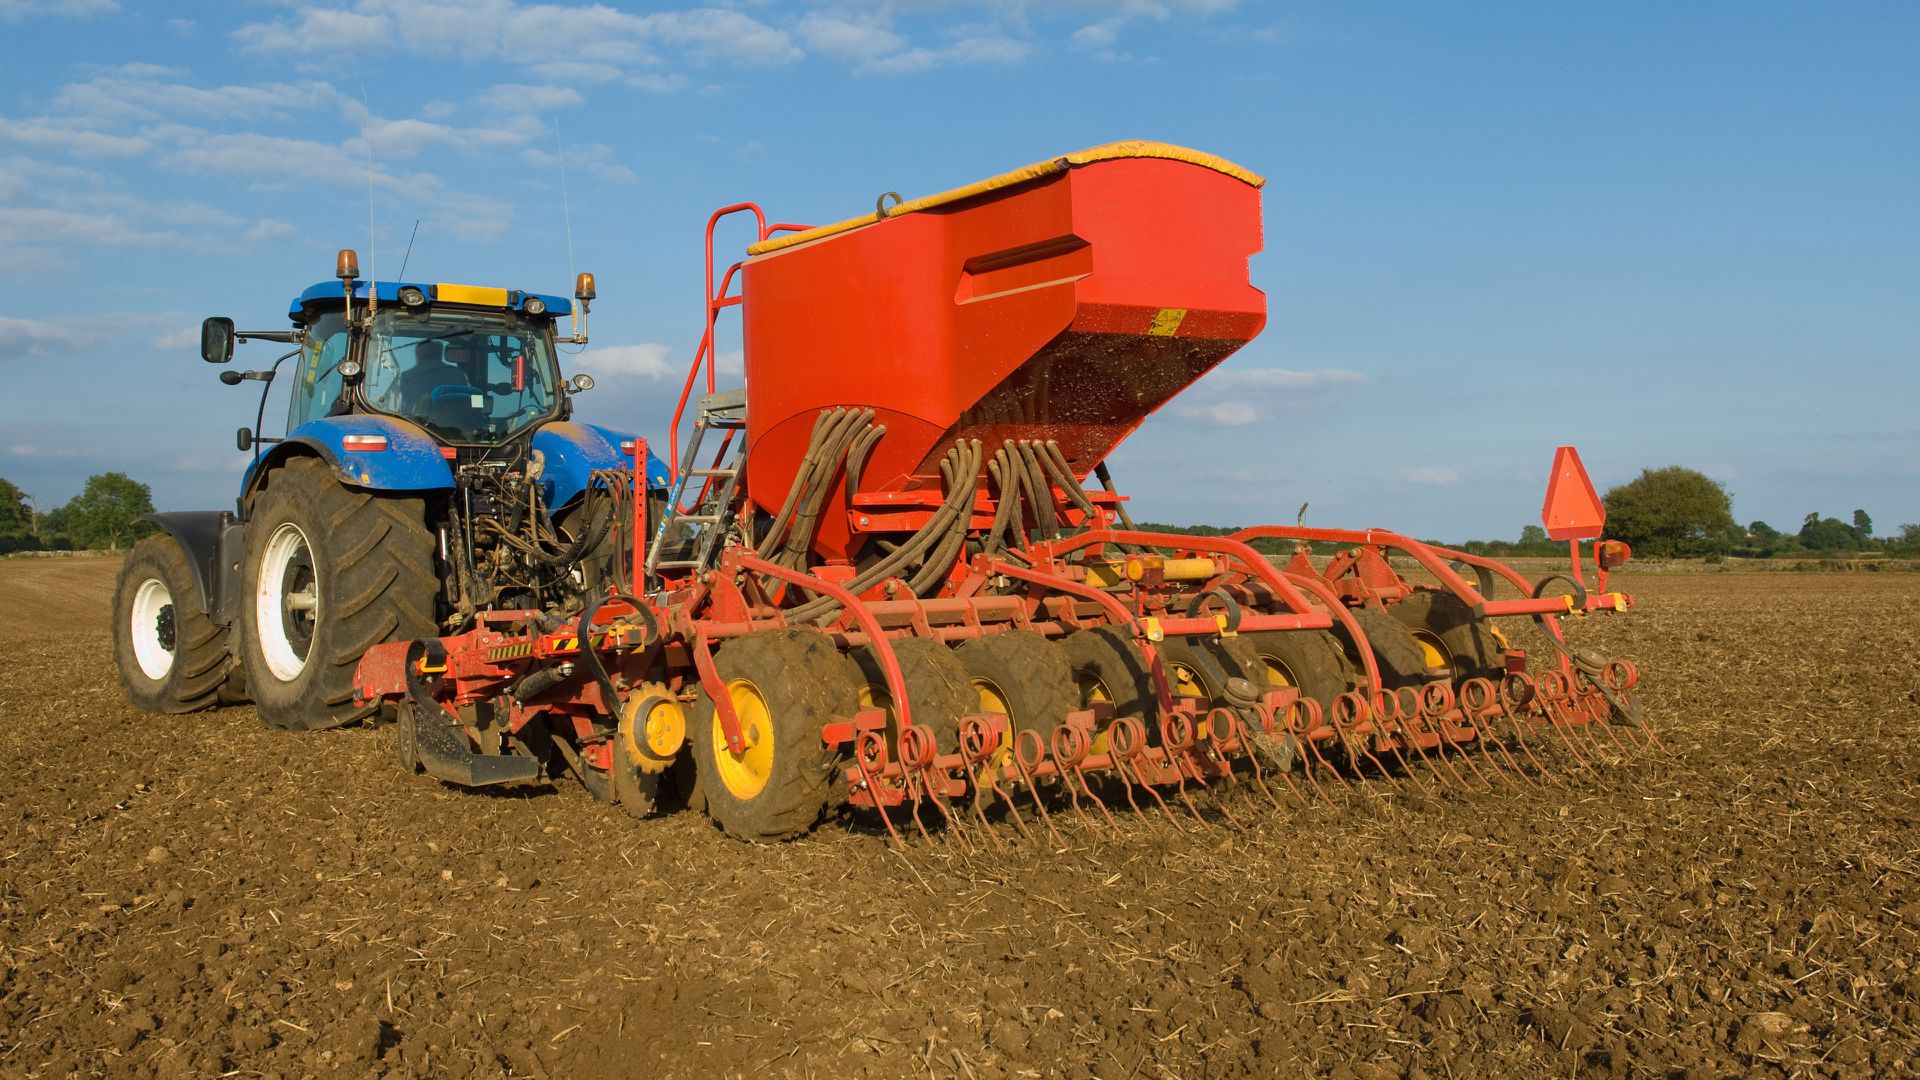 Can You Match the Farm Equipment to Its Function?